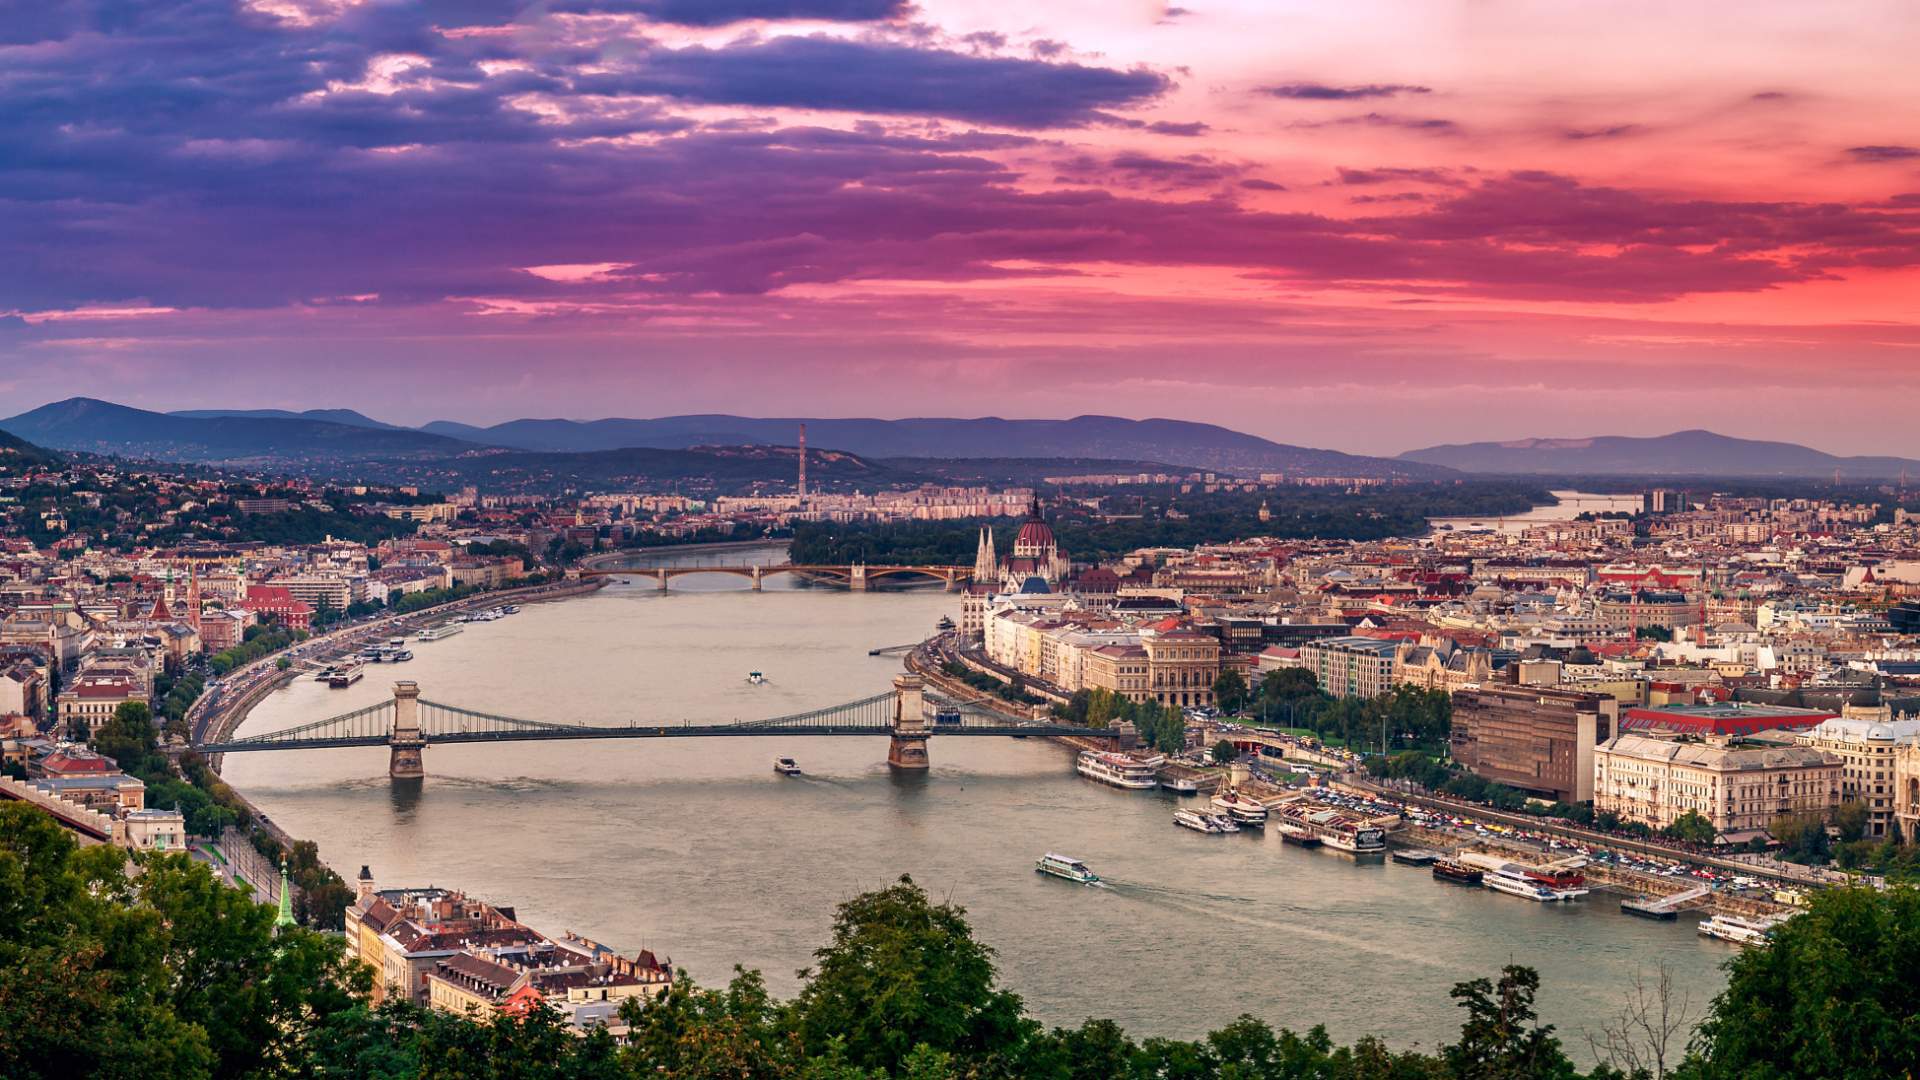 Looking for What to Do in Budapest? Don't Miss These 11 Things ...